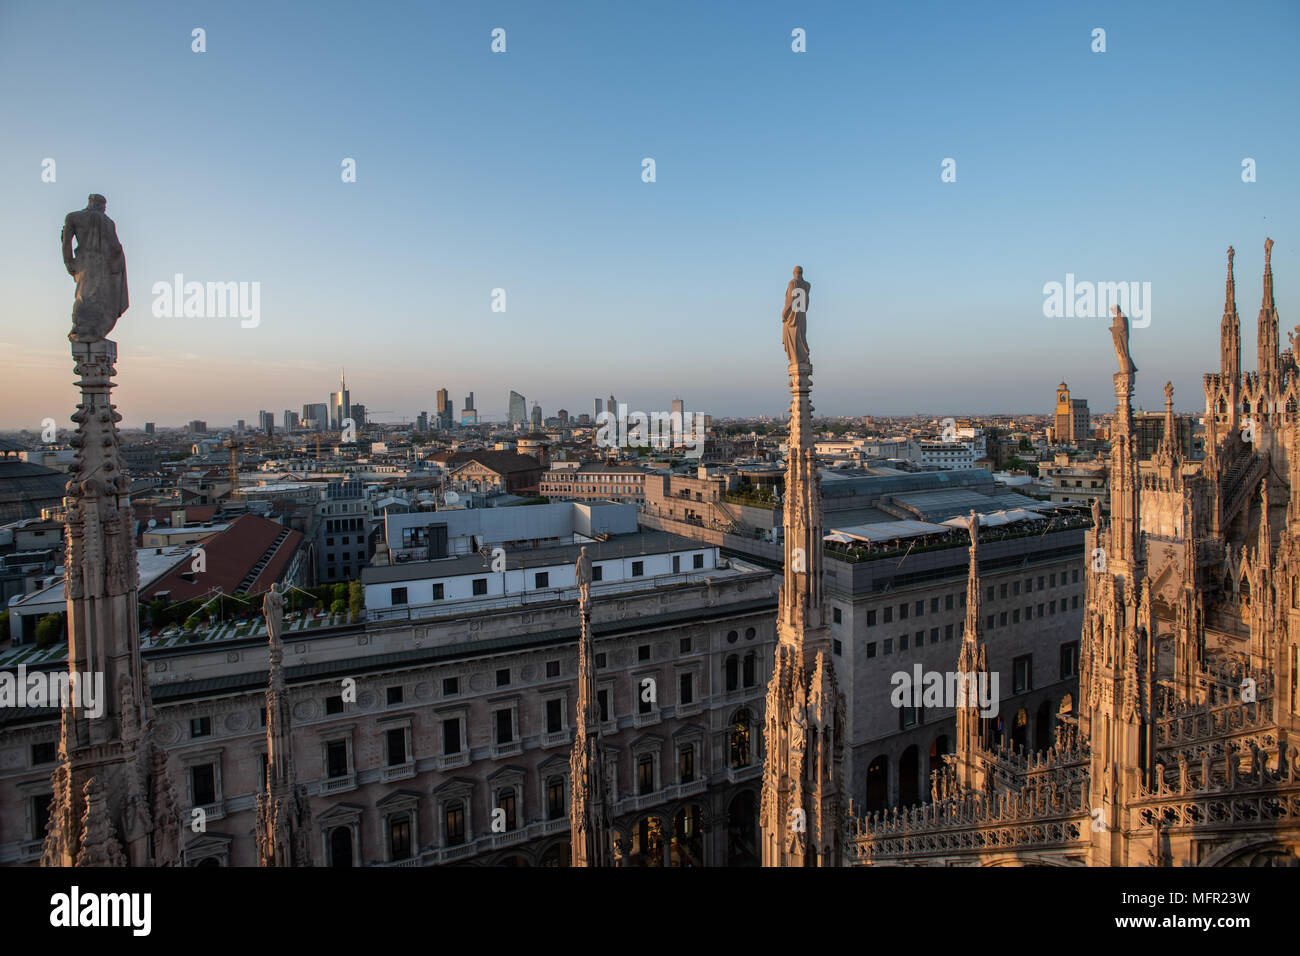 Milan, Italy - 25 April, 2018: The skyline of the city seen from the Duomo Cathedral at sunset. Stock Photo